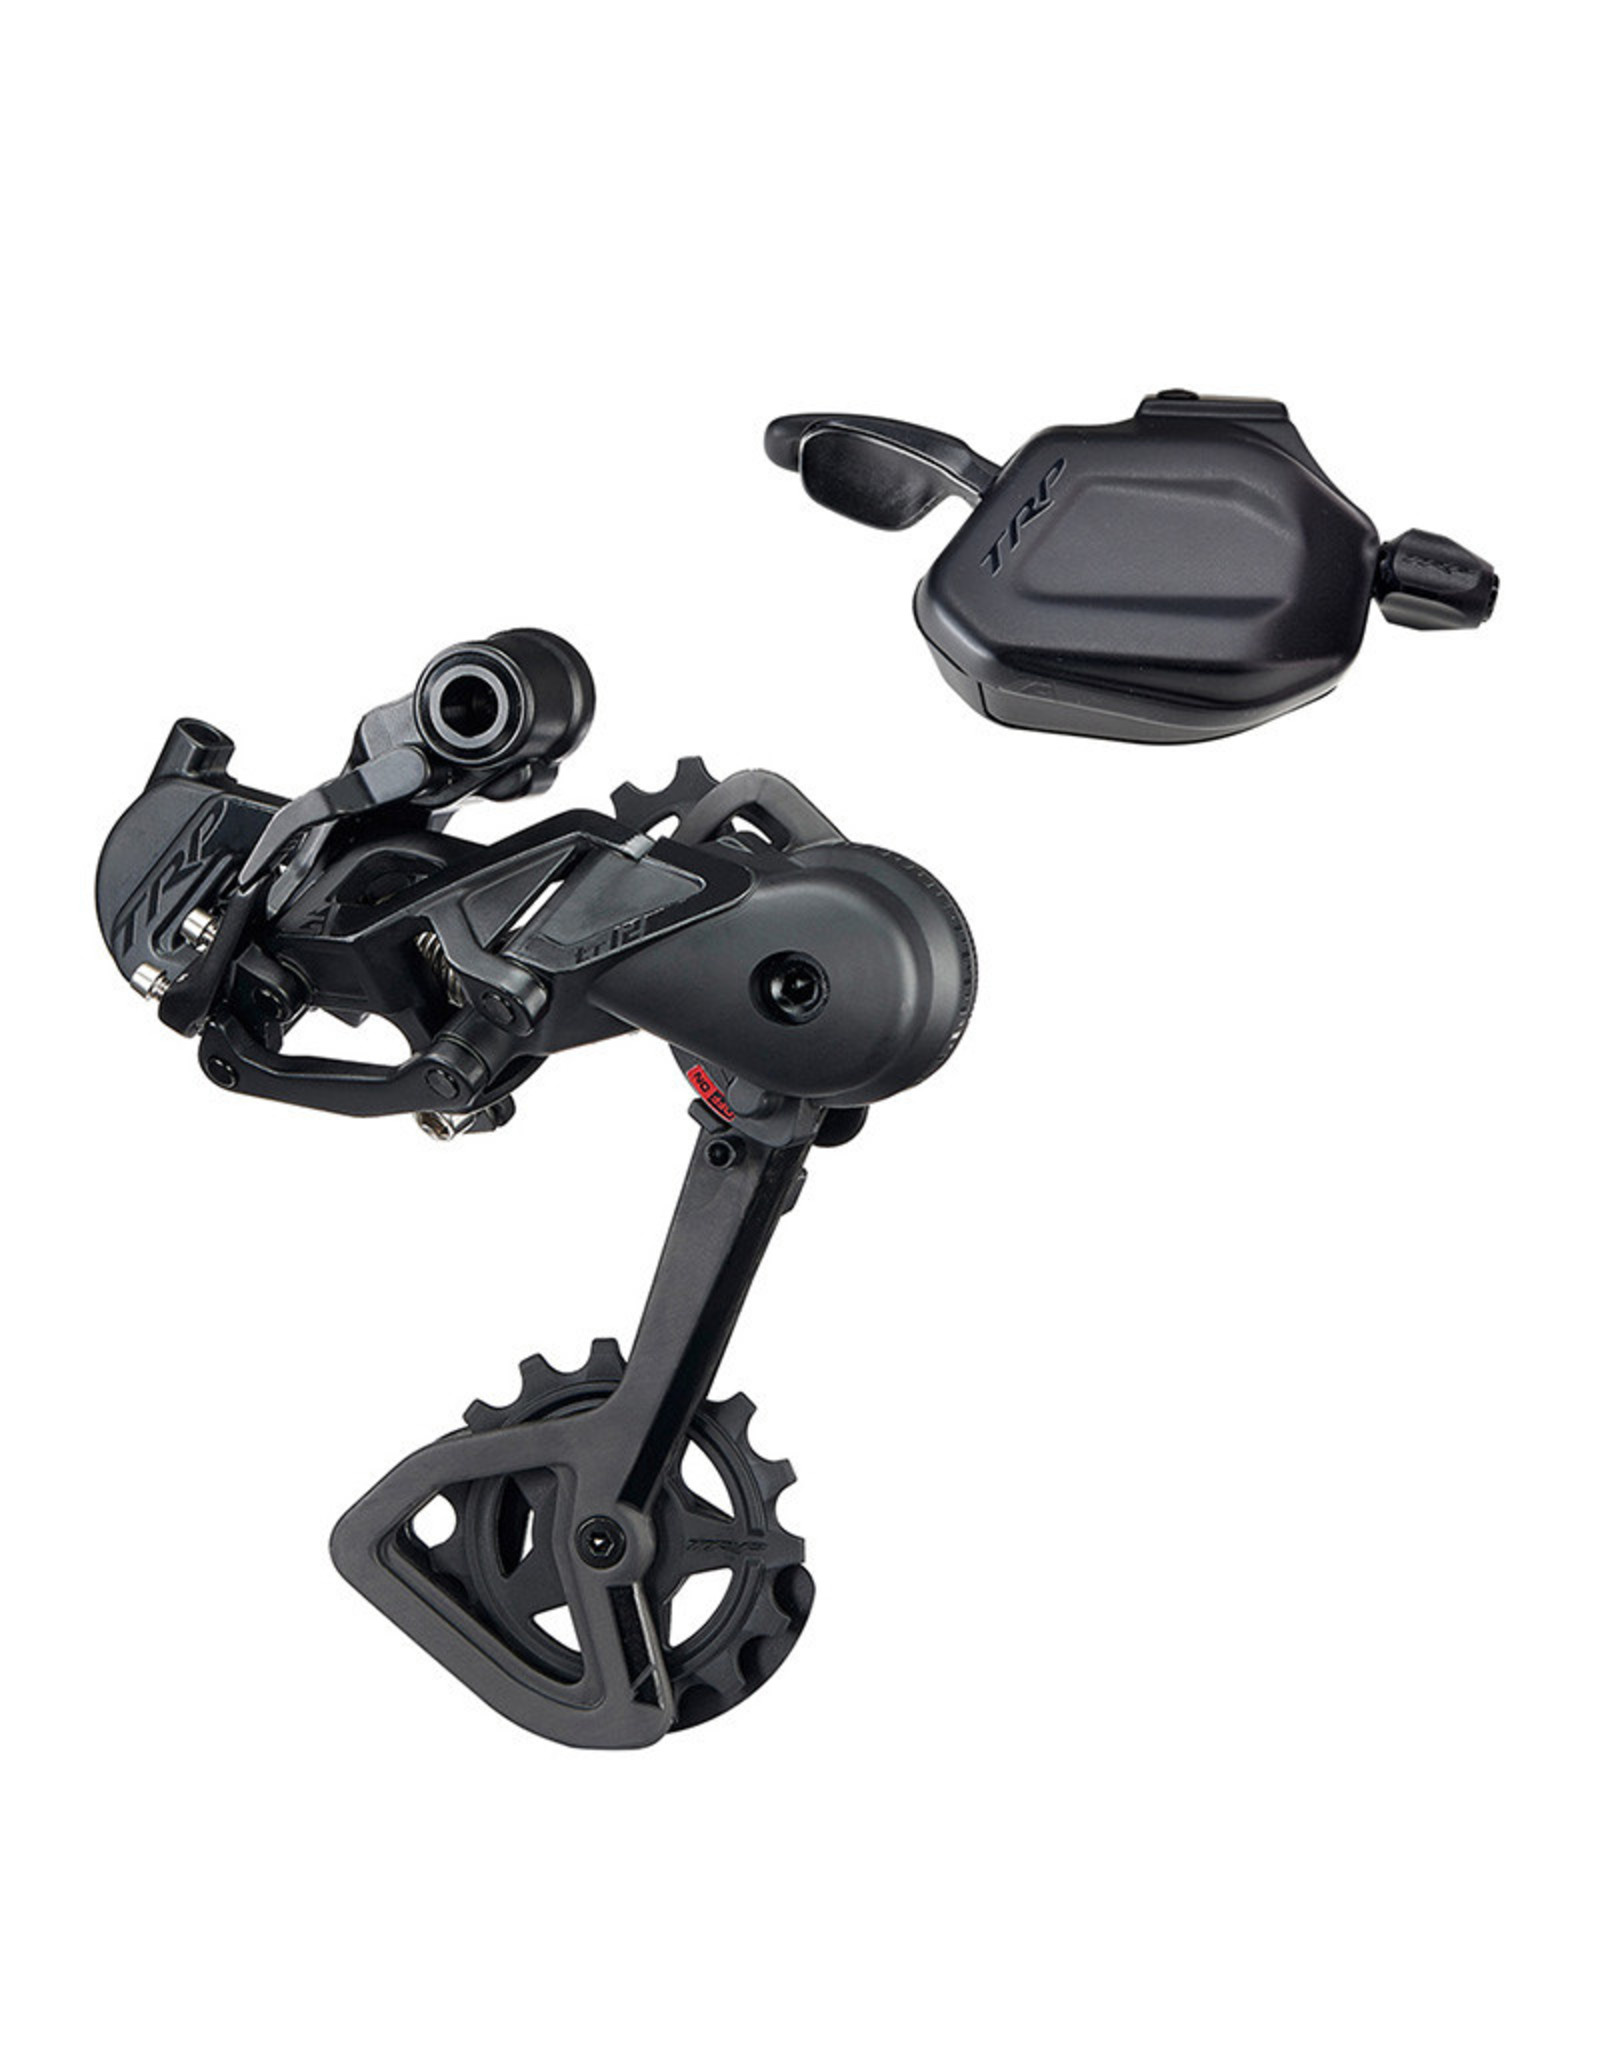 derailleur and shifter